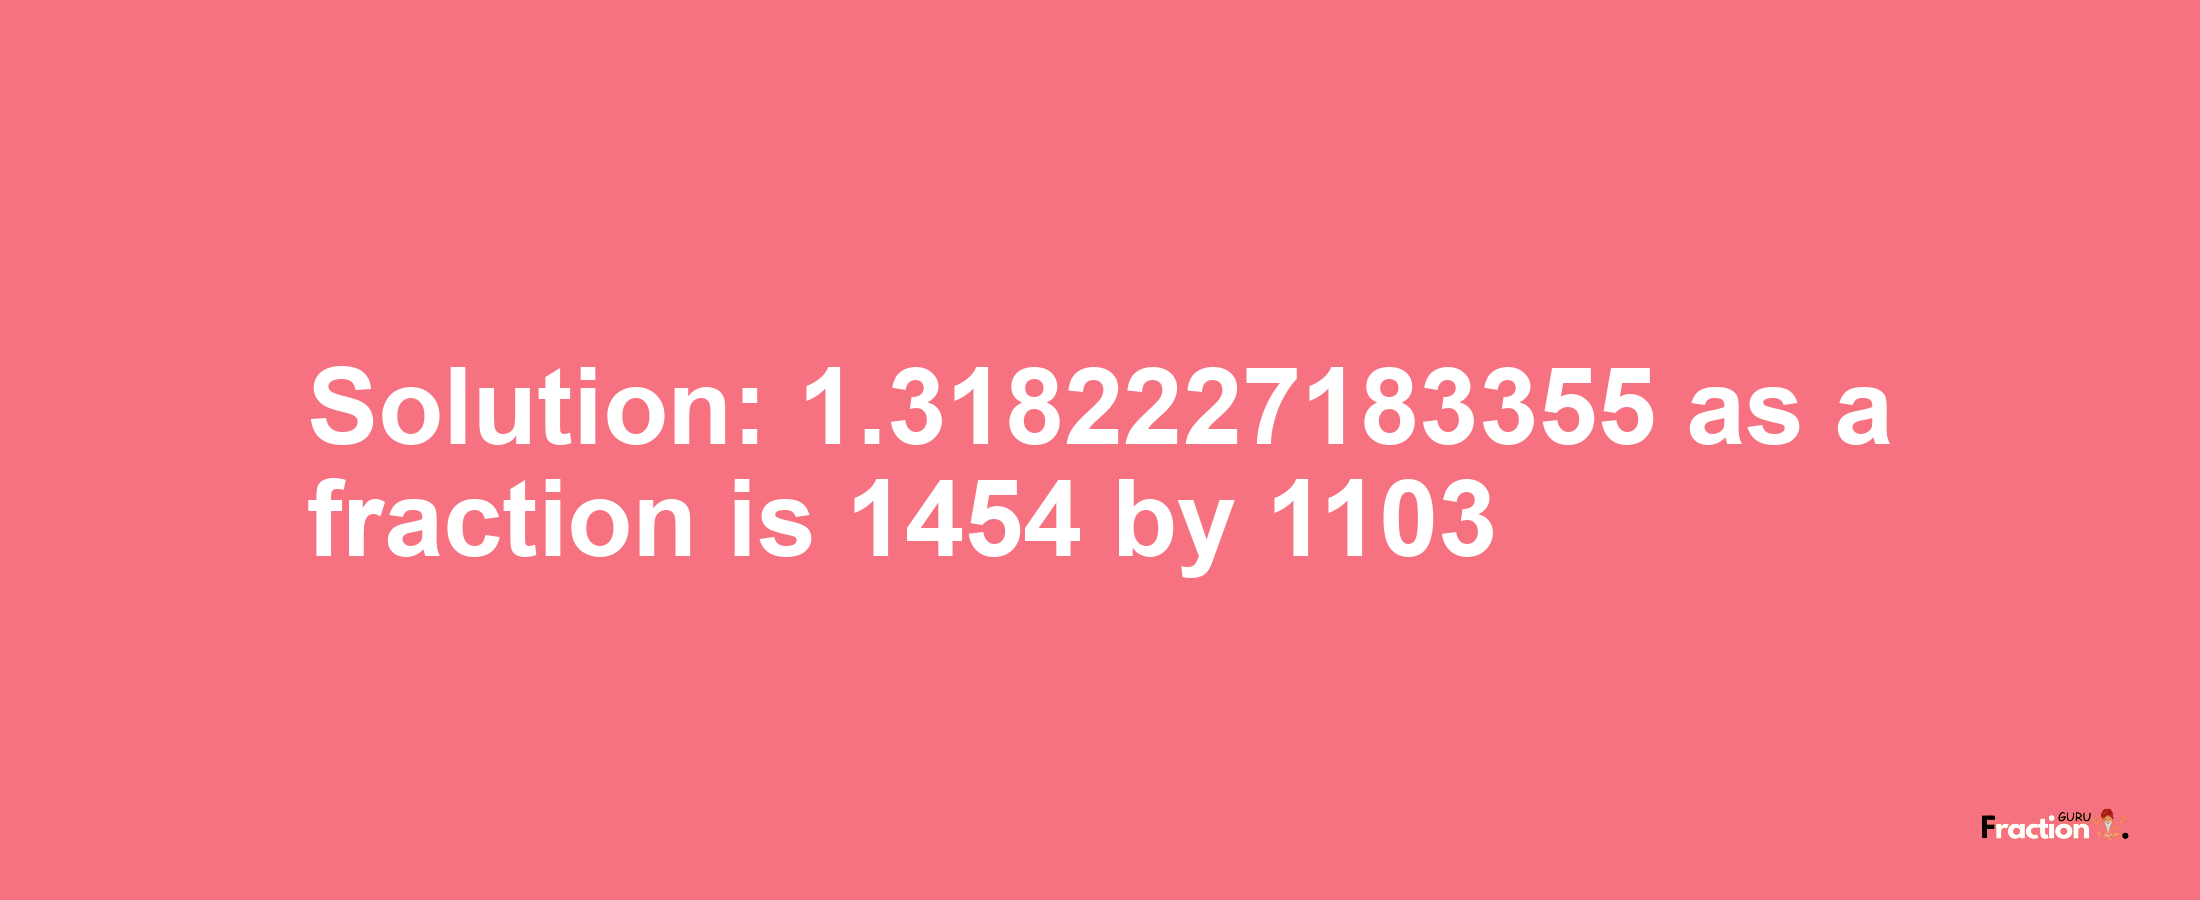 Solution:1.3182227183355 as a fraction is 1454/1103